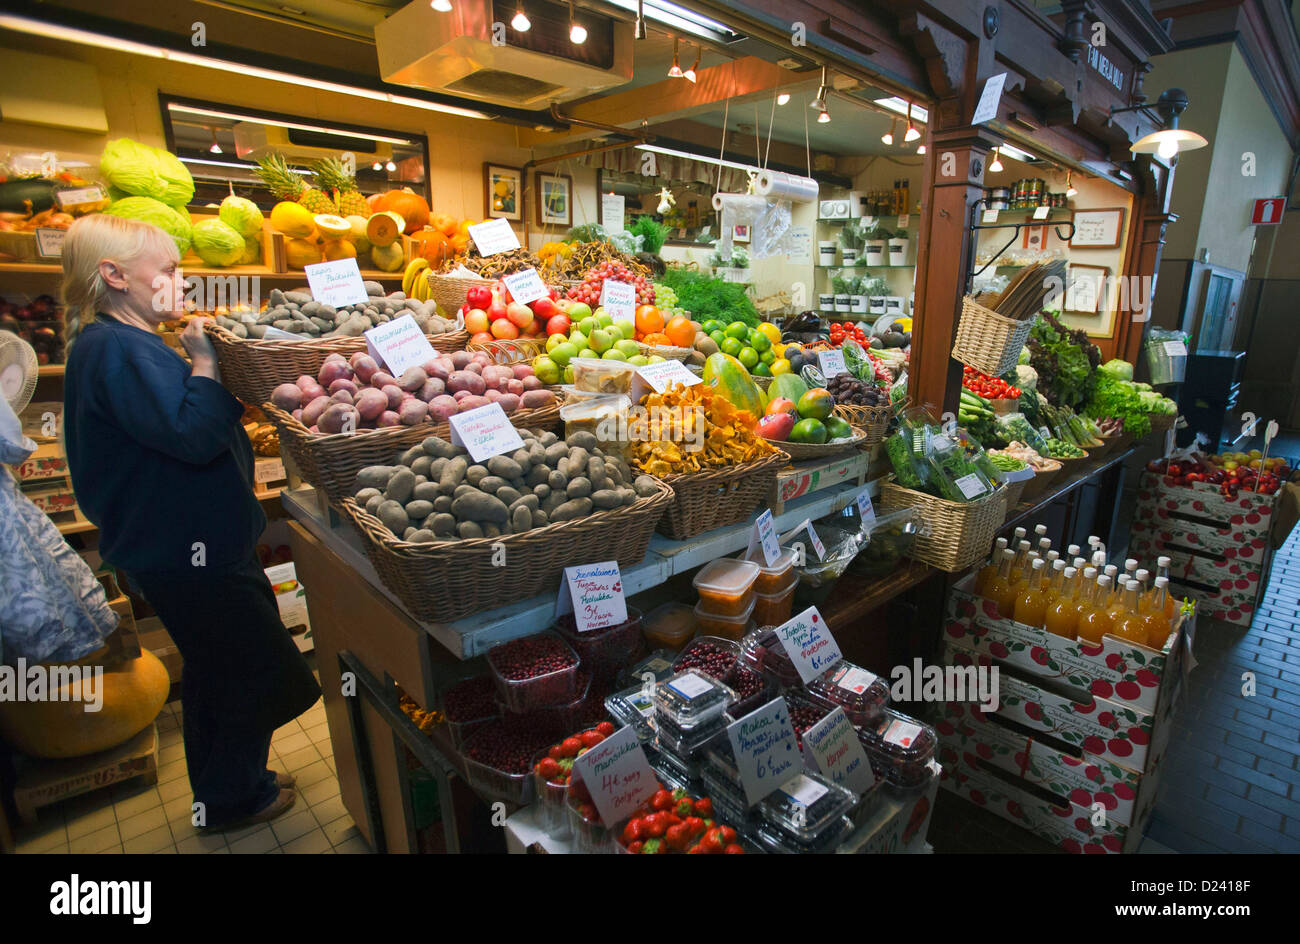 A stand with fruits and vegetables in the market hall in Helsinki, Finland, 16 October 2012. Photo: Jens Buettner Stock Photo